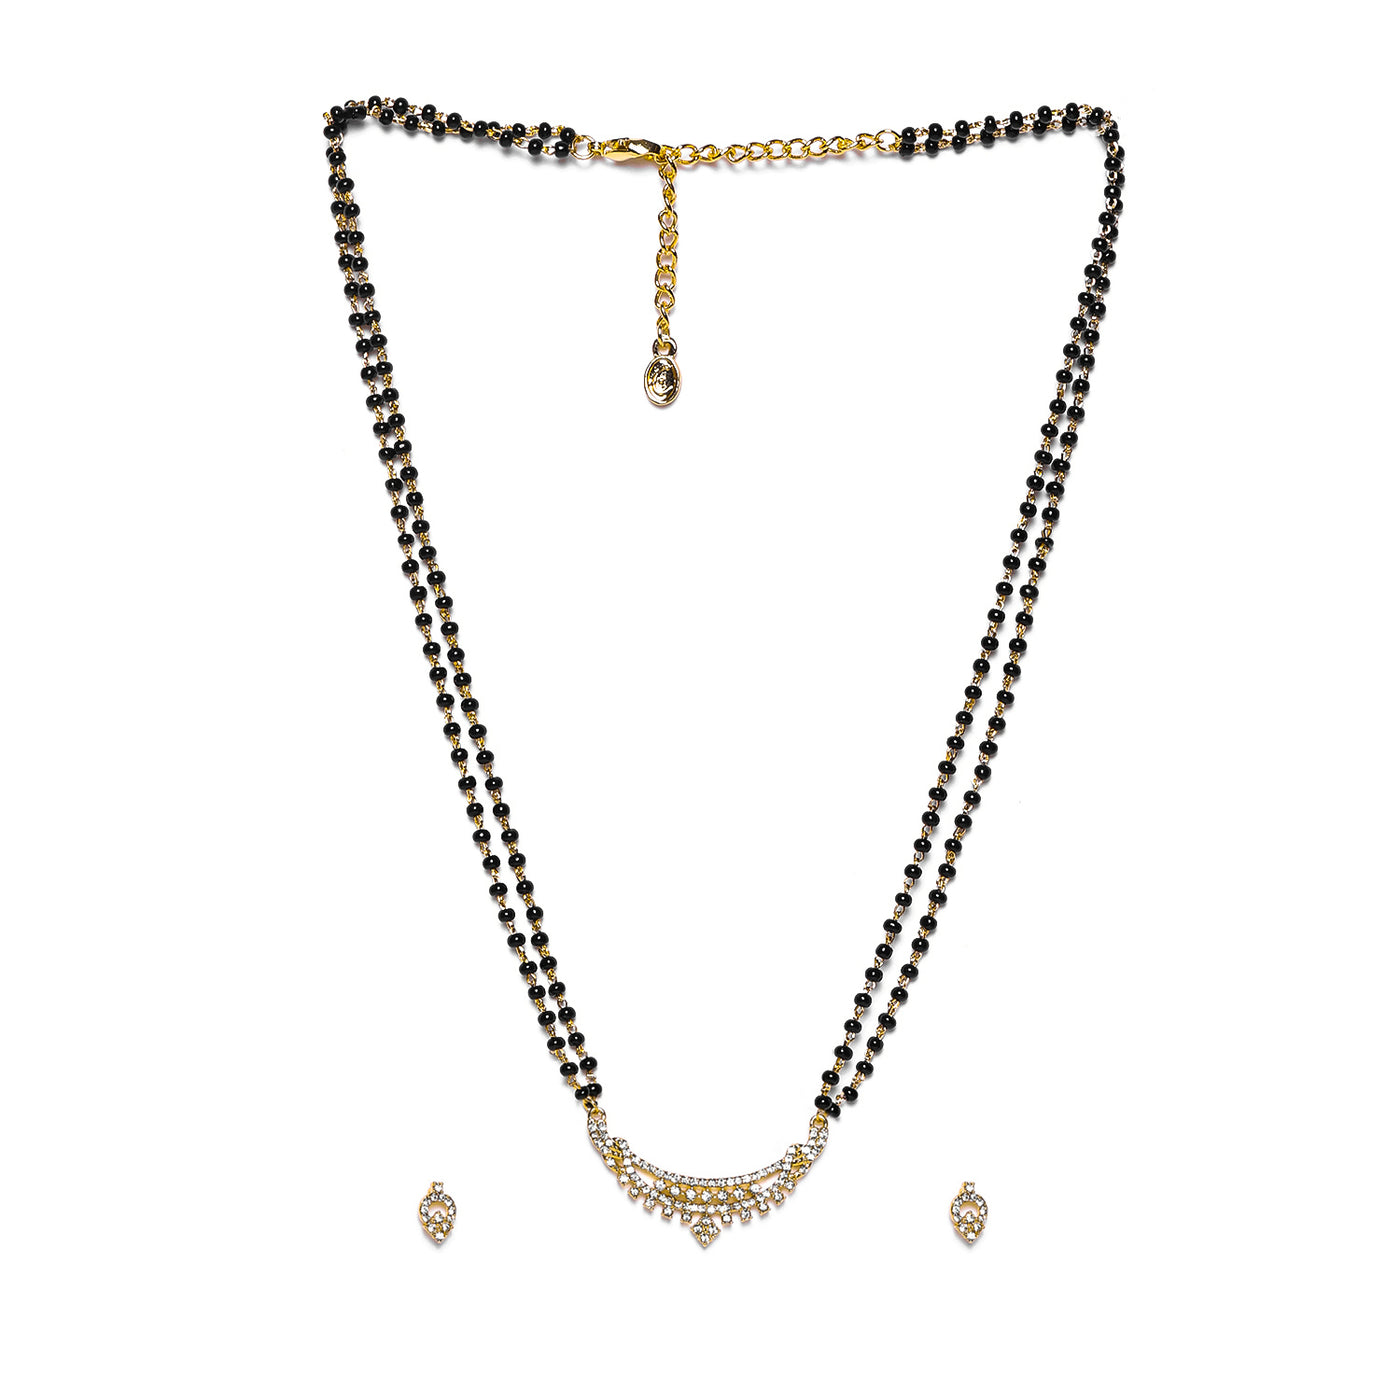 Estele Gold Plated Innovative Mangalsutra Necklace Set with Austrian Crystals for Women